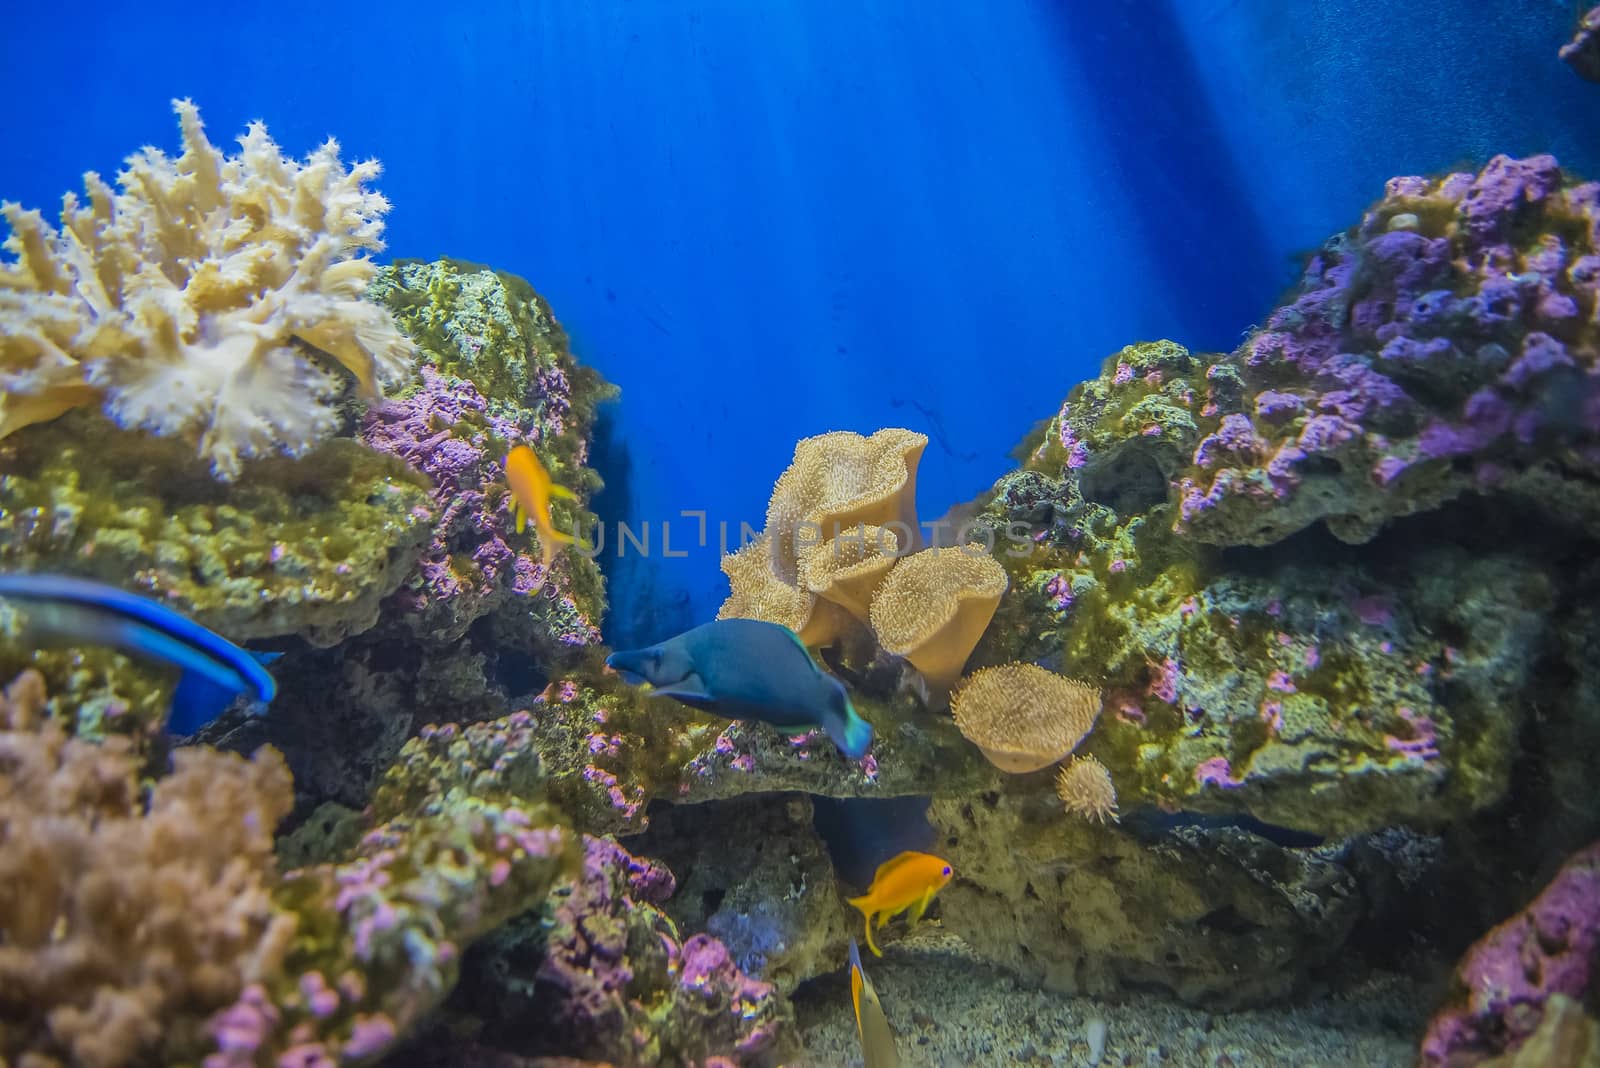 The photos are shot in an aquarium July 25, 2013.